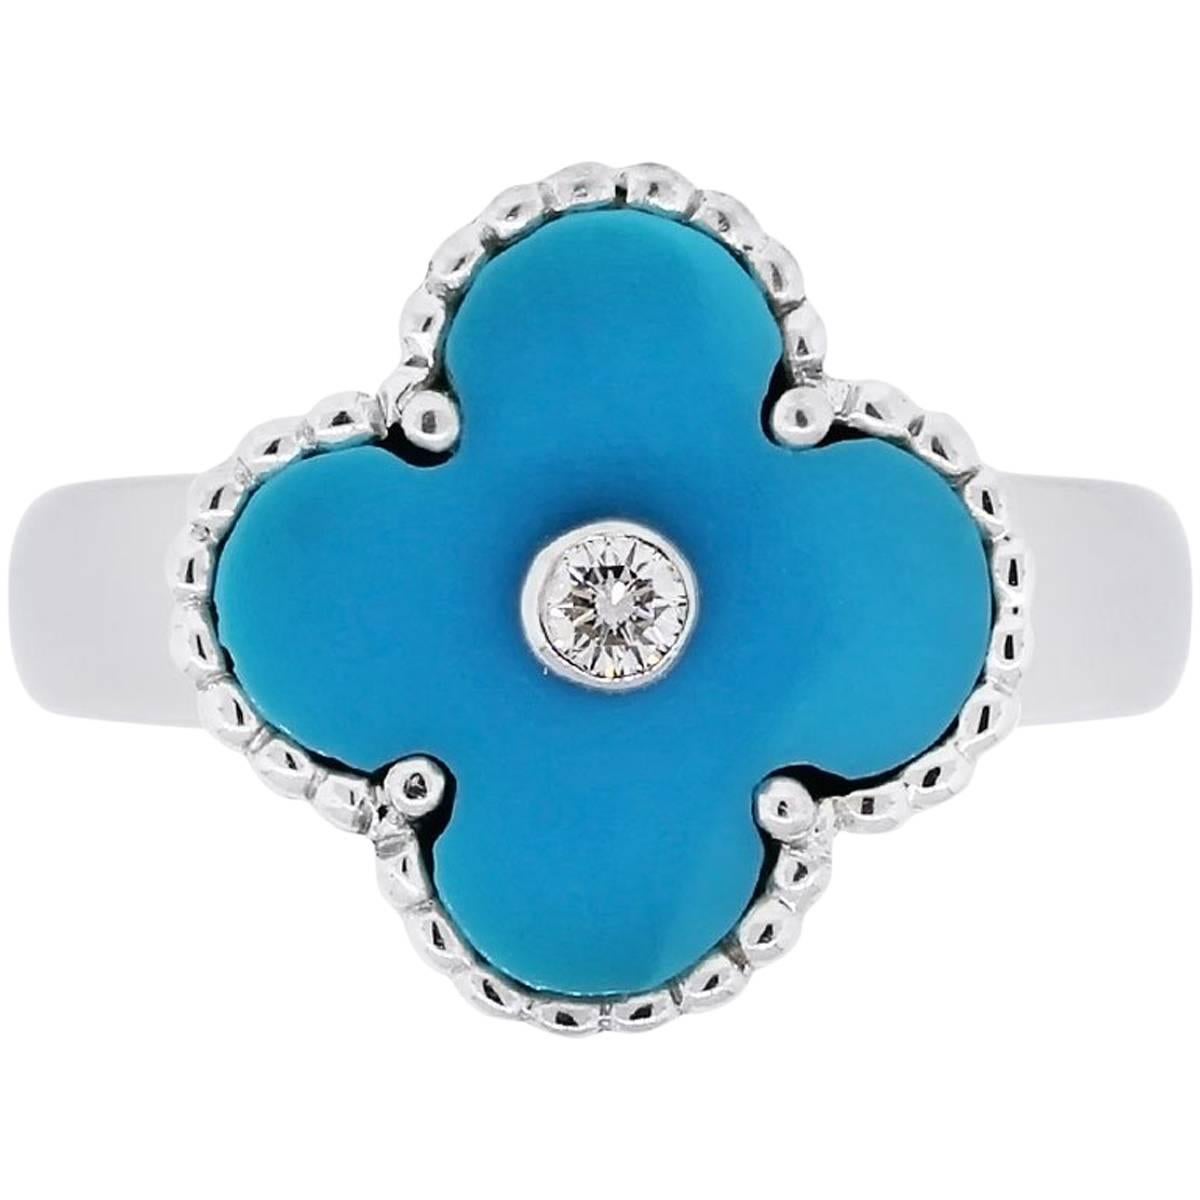 Van Cleef & Arpels Diamond and Turquoise Alhambra Ring